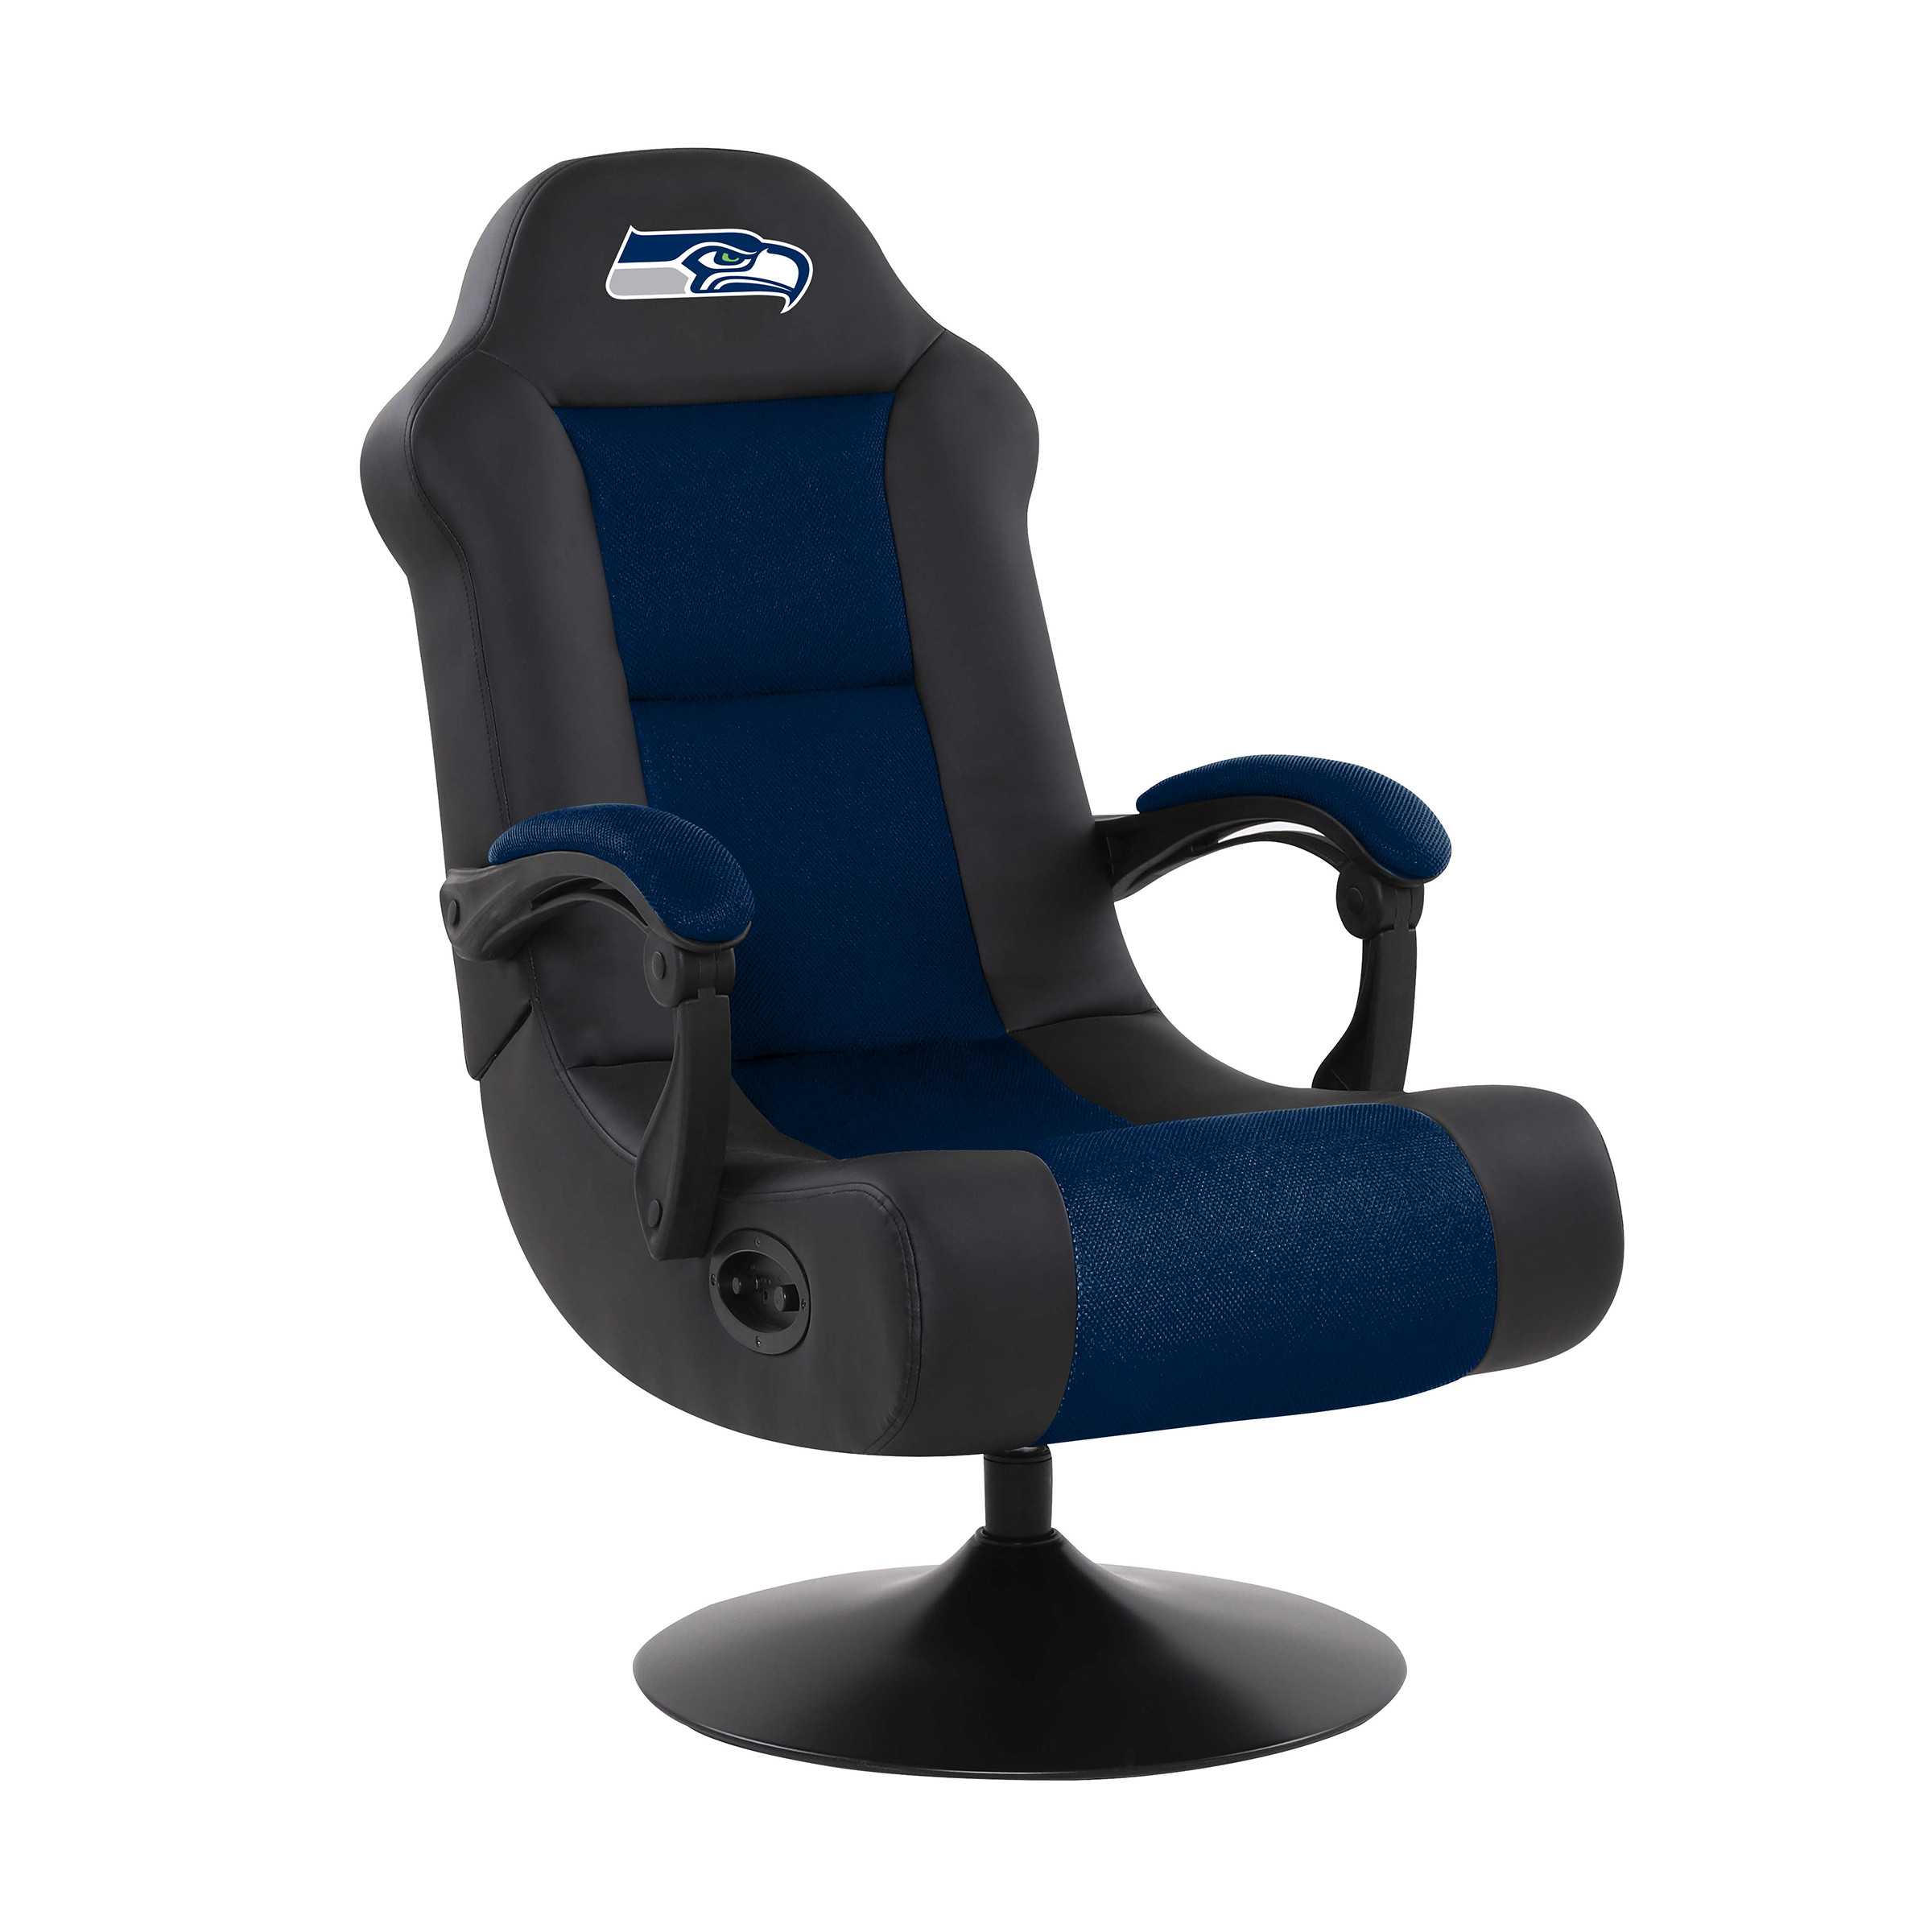 ULTRA GAME CHAIR SEATTLE SEAHAWKS